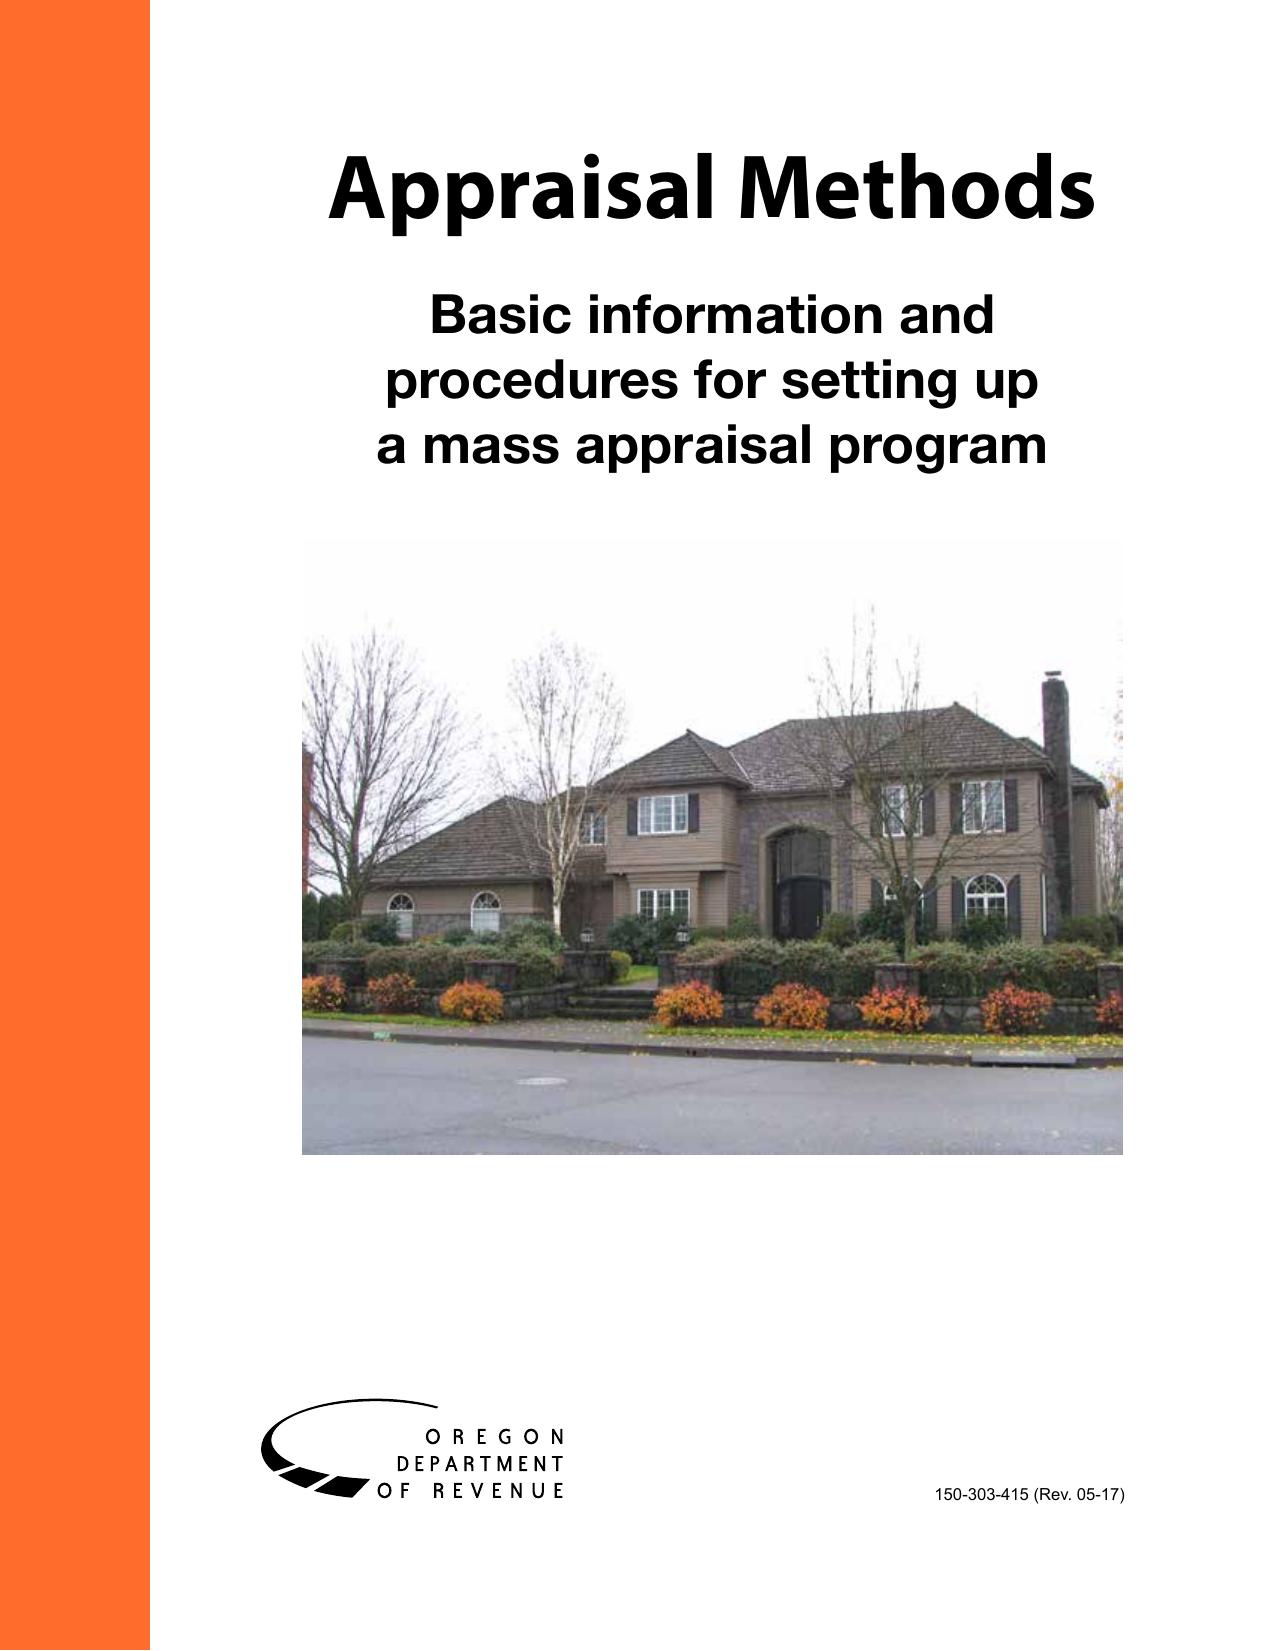 Appraisal Methods for Real Property 2015